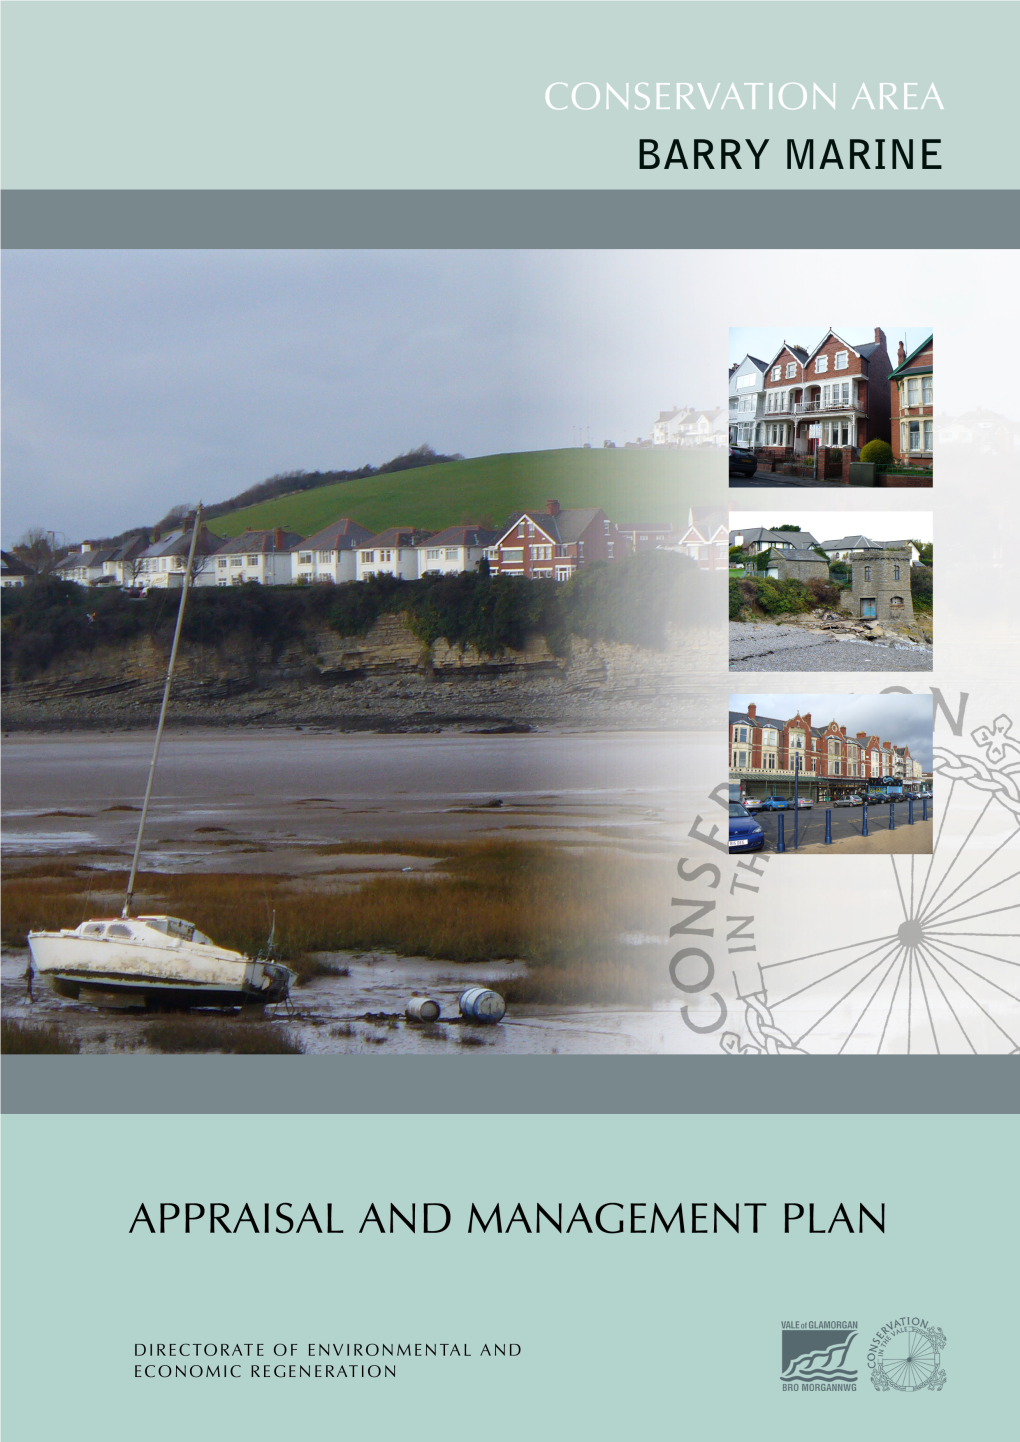 Barry Marine Conservation Area Appraisal and Management Plan